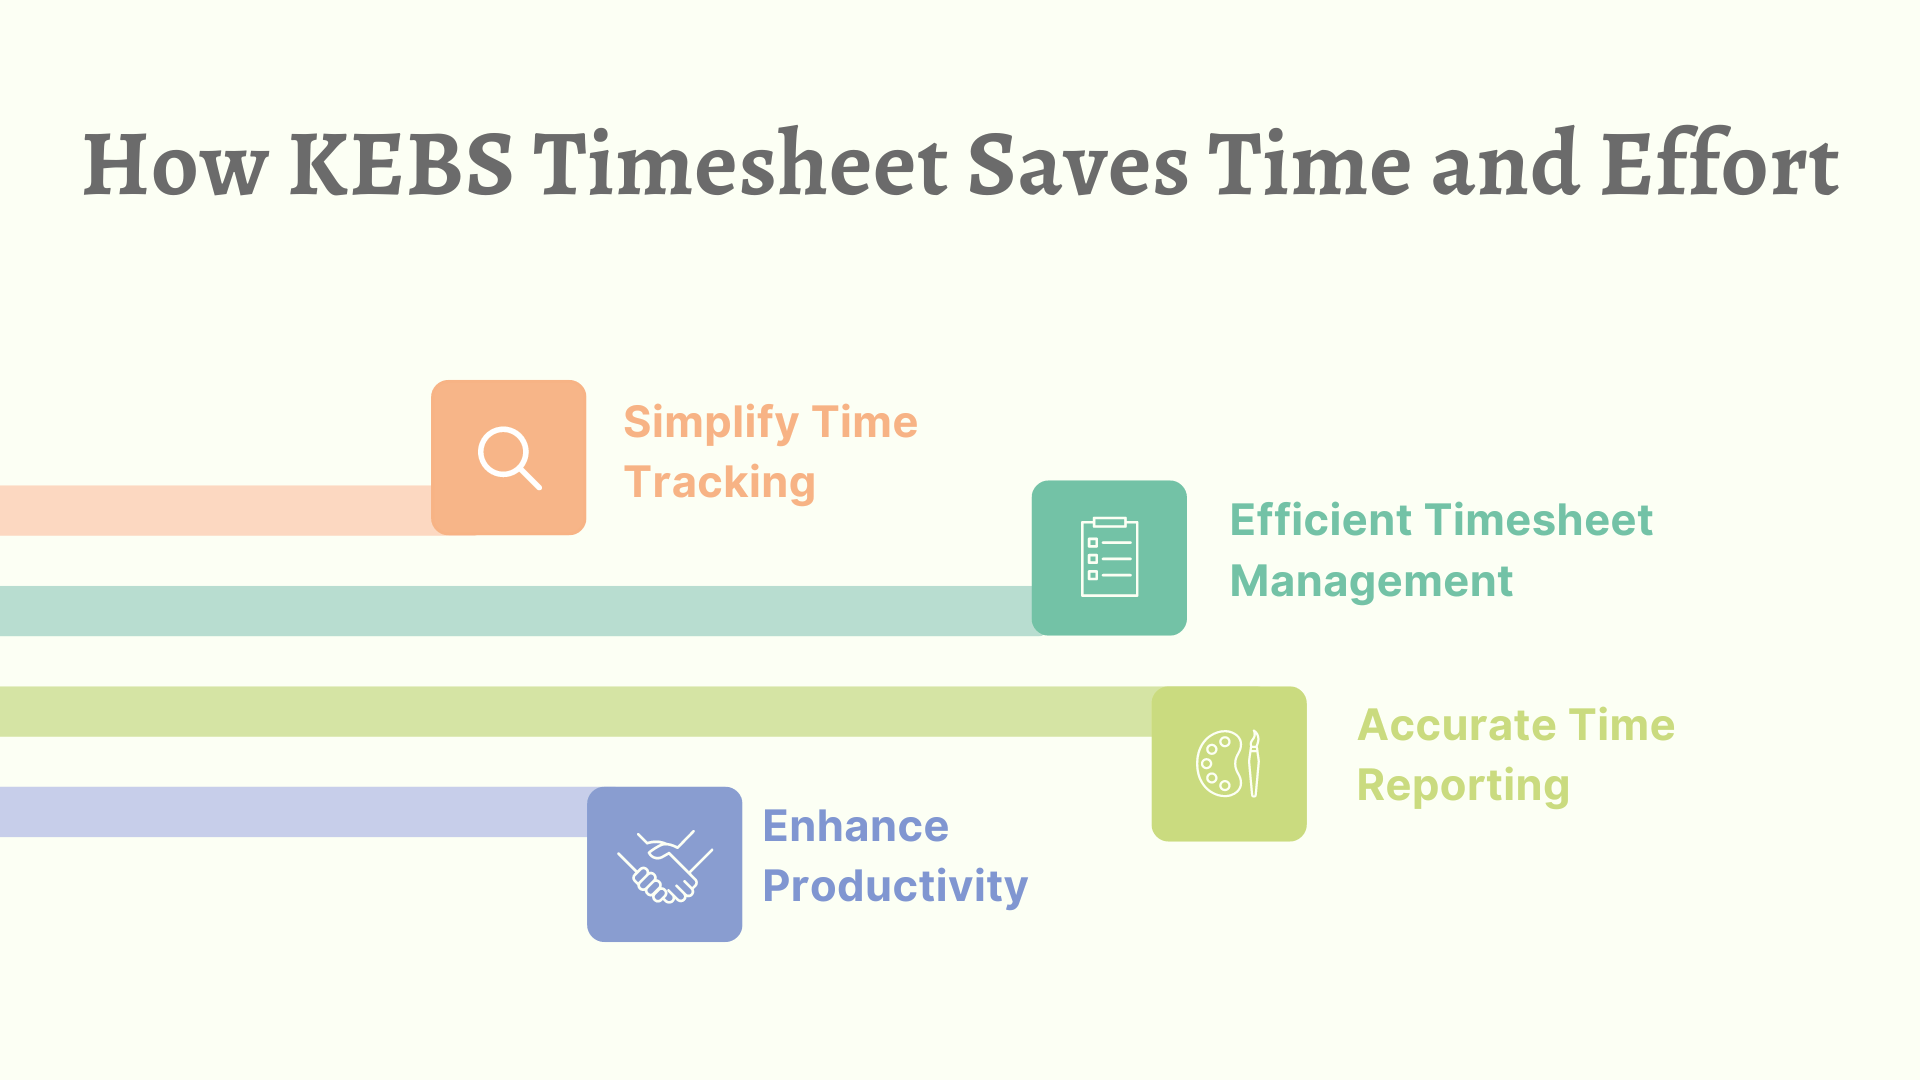 Time and Effort Savings with KEBS Timesheet